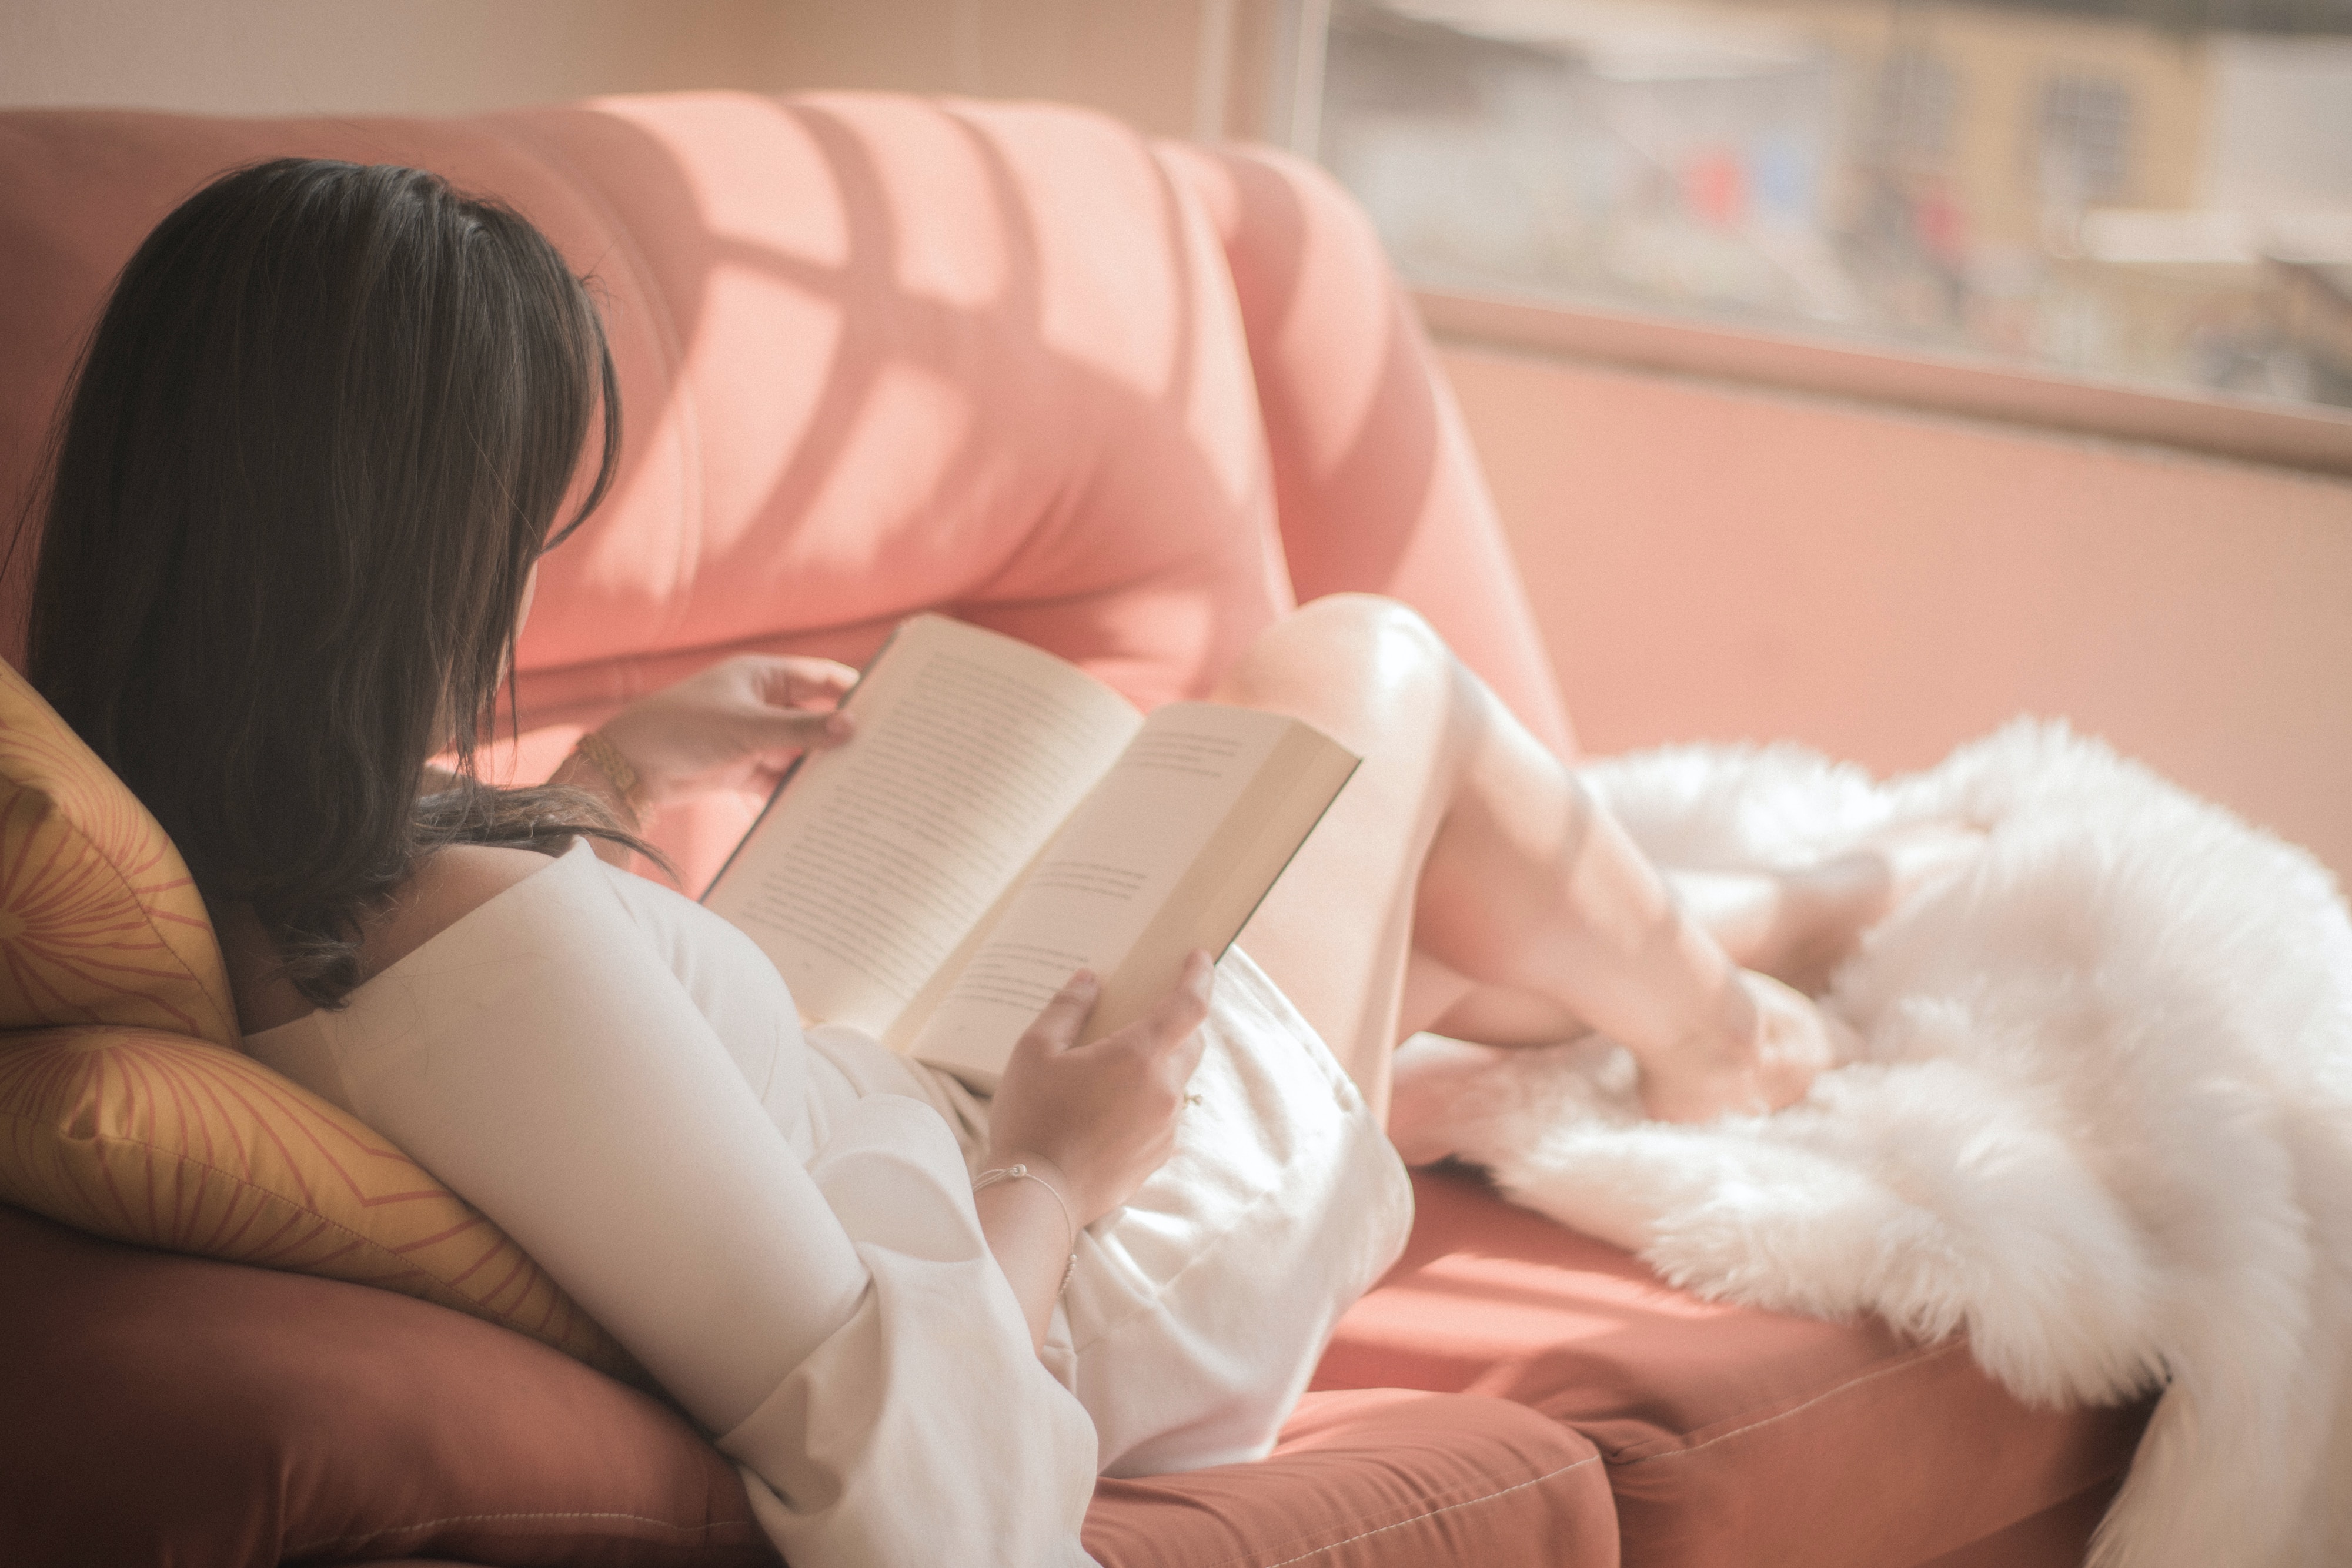 A woman reading while lying on a couch.  | Source: Unsplash